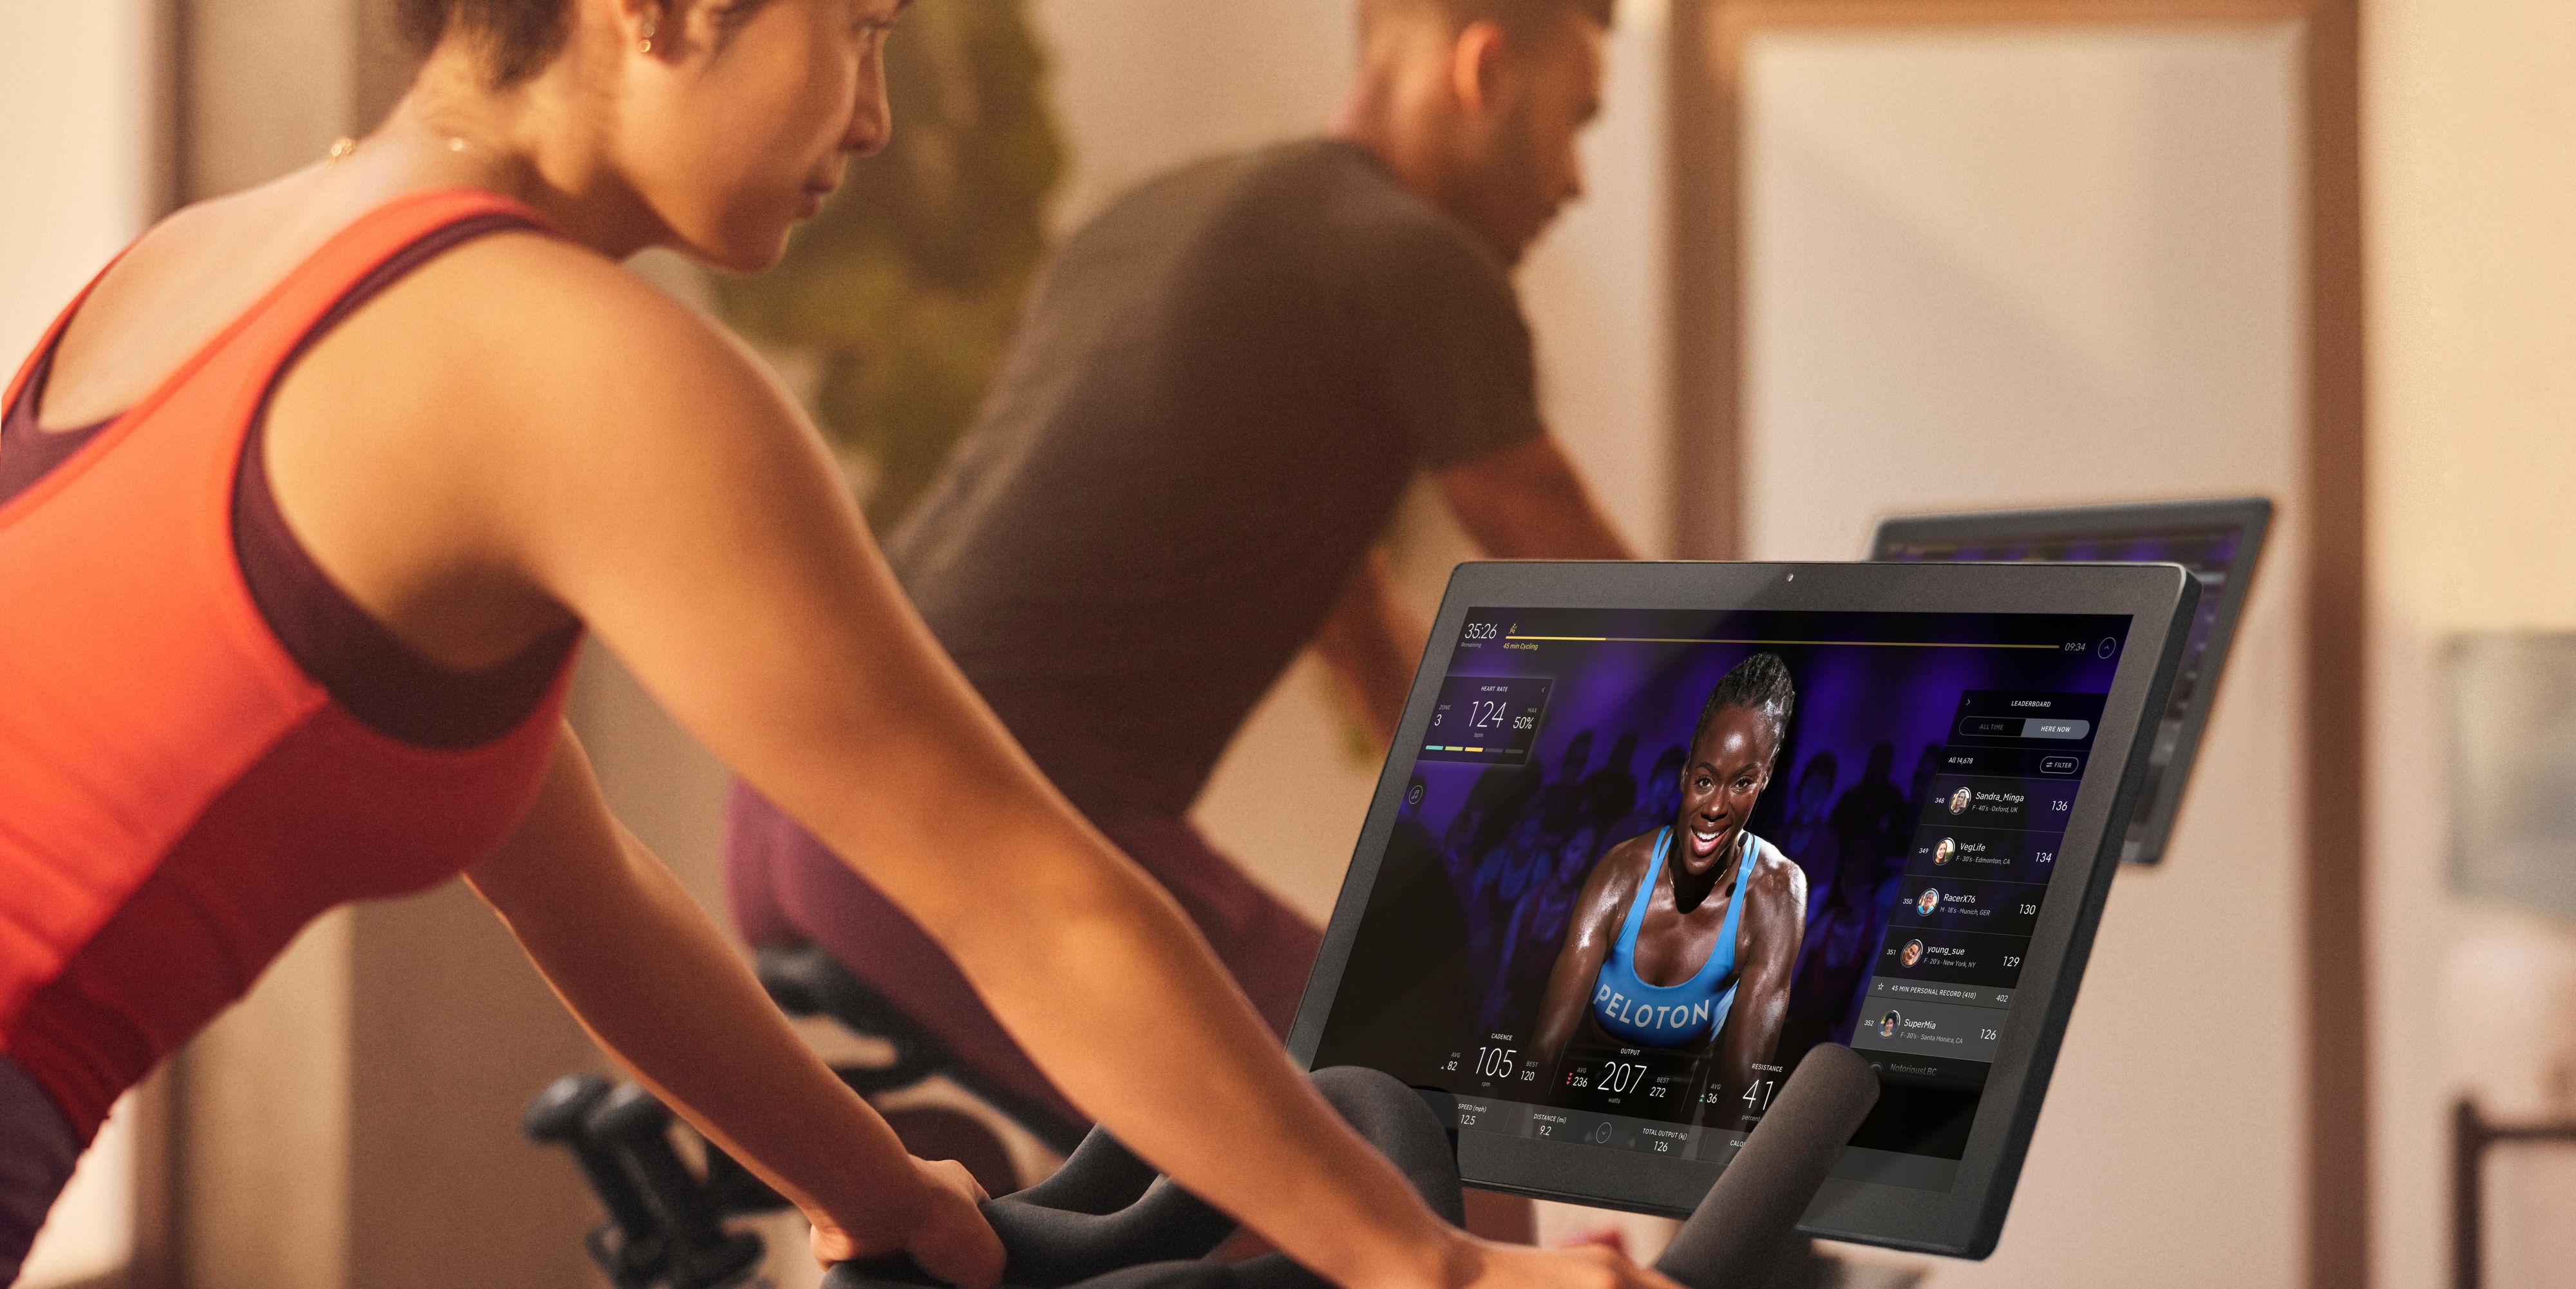 Our New York hotel with Peloton bike is great for staying active.